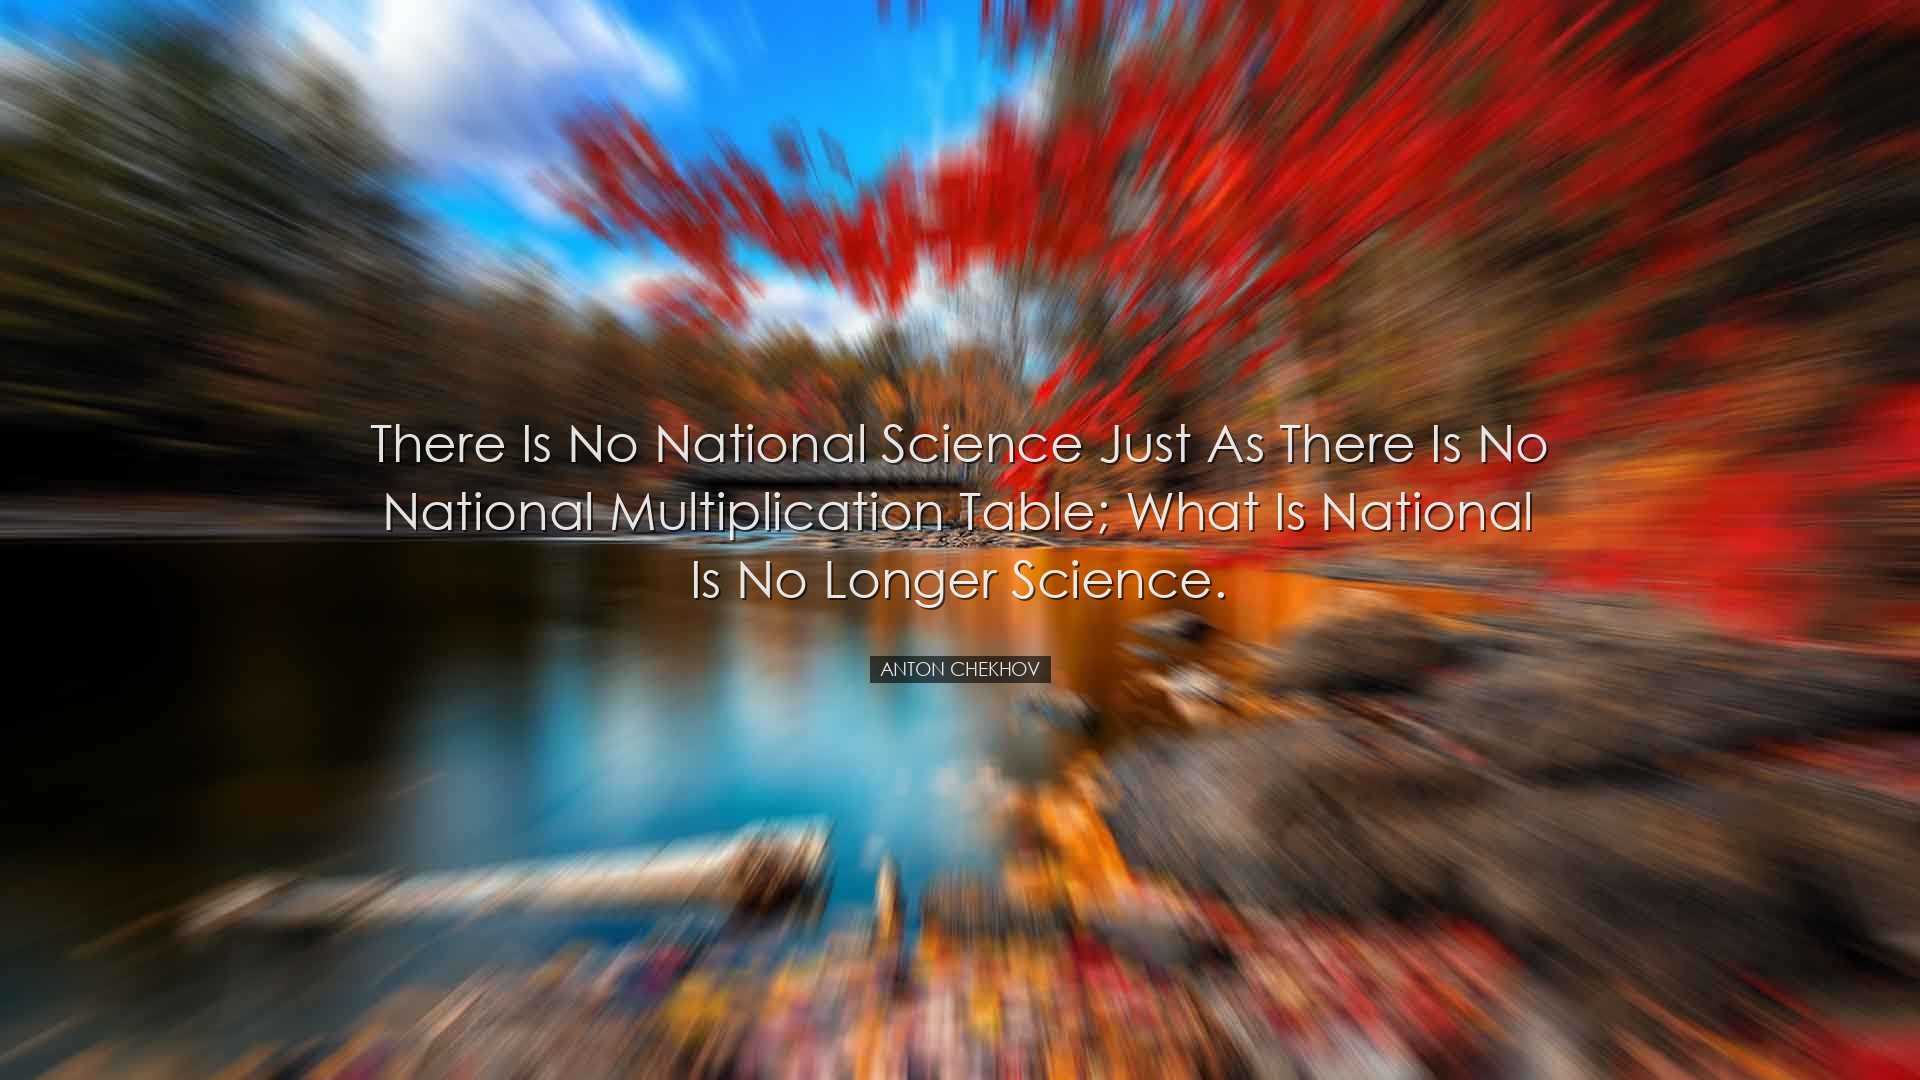 There is no national science just as there is no national multipli